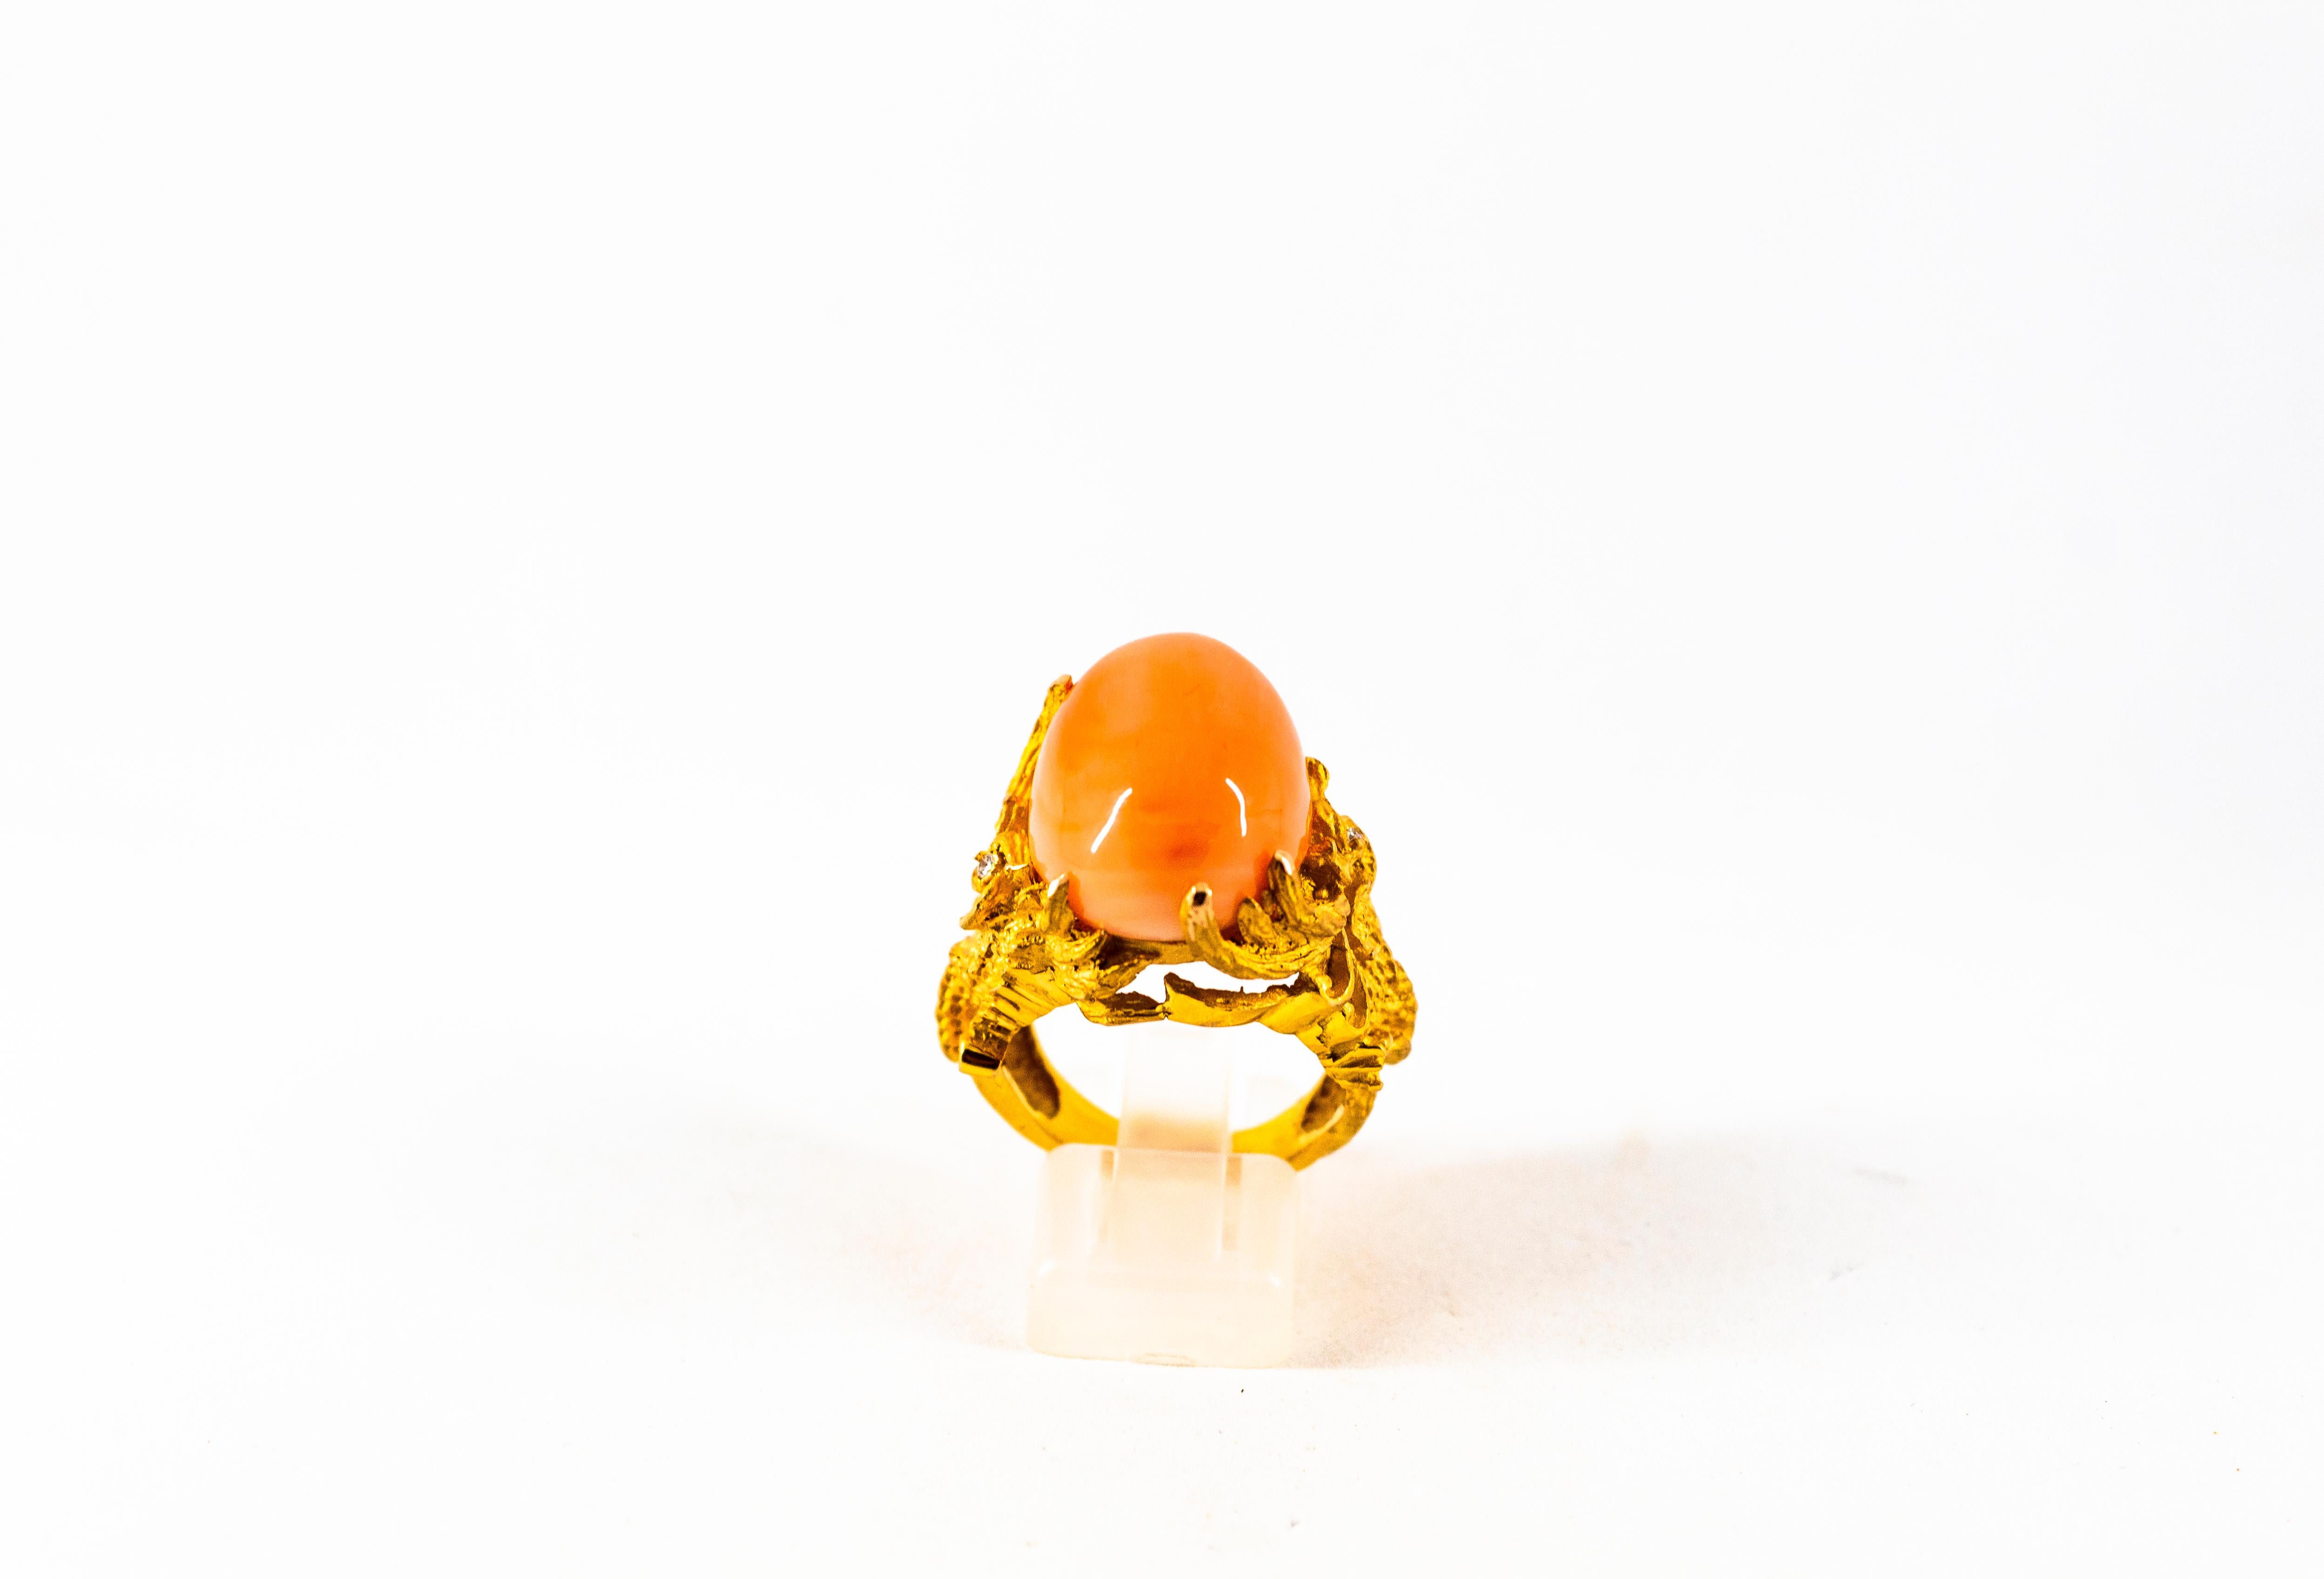 This Ring is made of 14K Yellow Gold.
This Ring is available also in 18K or 9K Yellow or White Gold.
This Ring has 0.02 Carats of White Diamonds.
This Ring has a 21.50 Carats (4.30 Grams) Cabochon Cut Pink Coral.
Size ITA: 17 USA: 8
We're a workshop